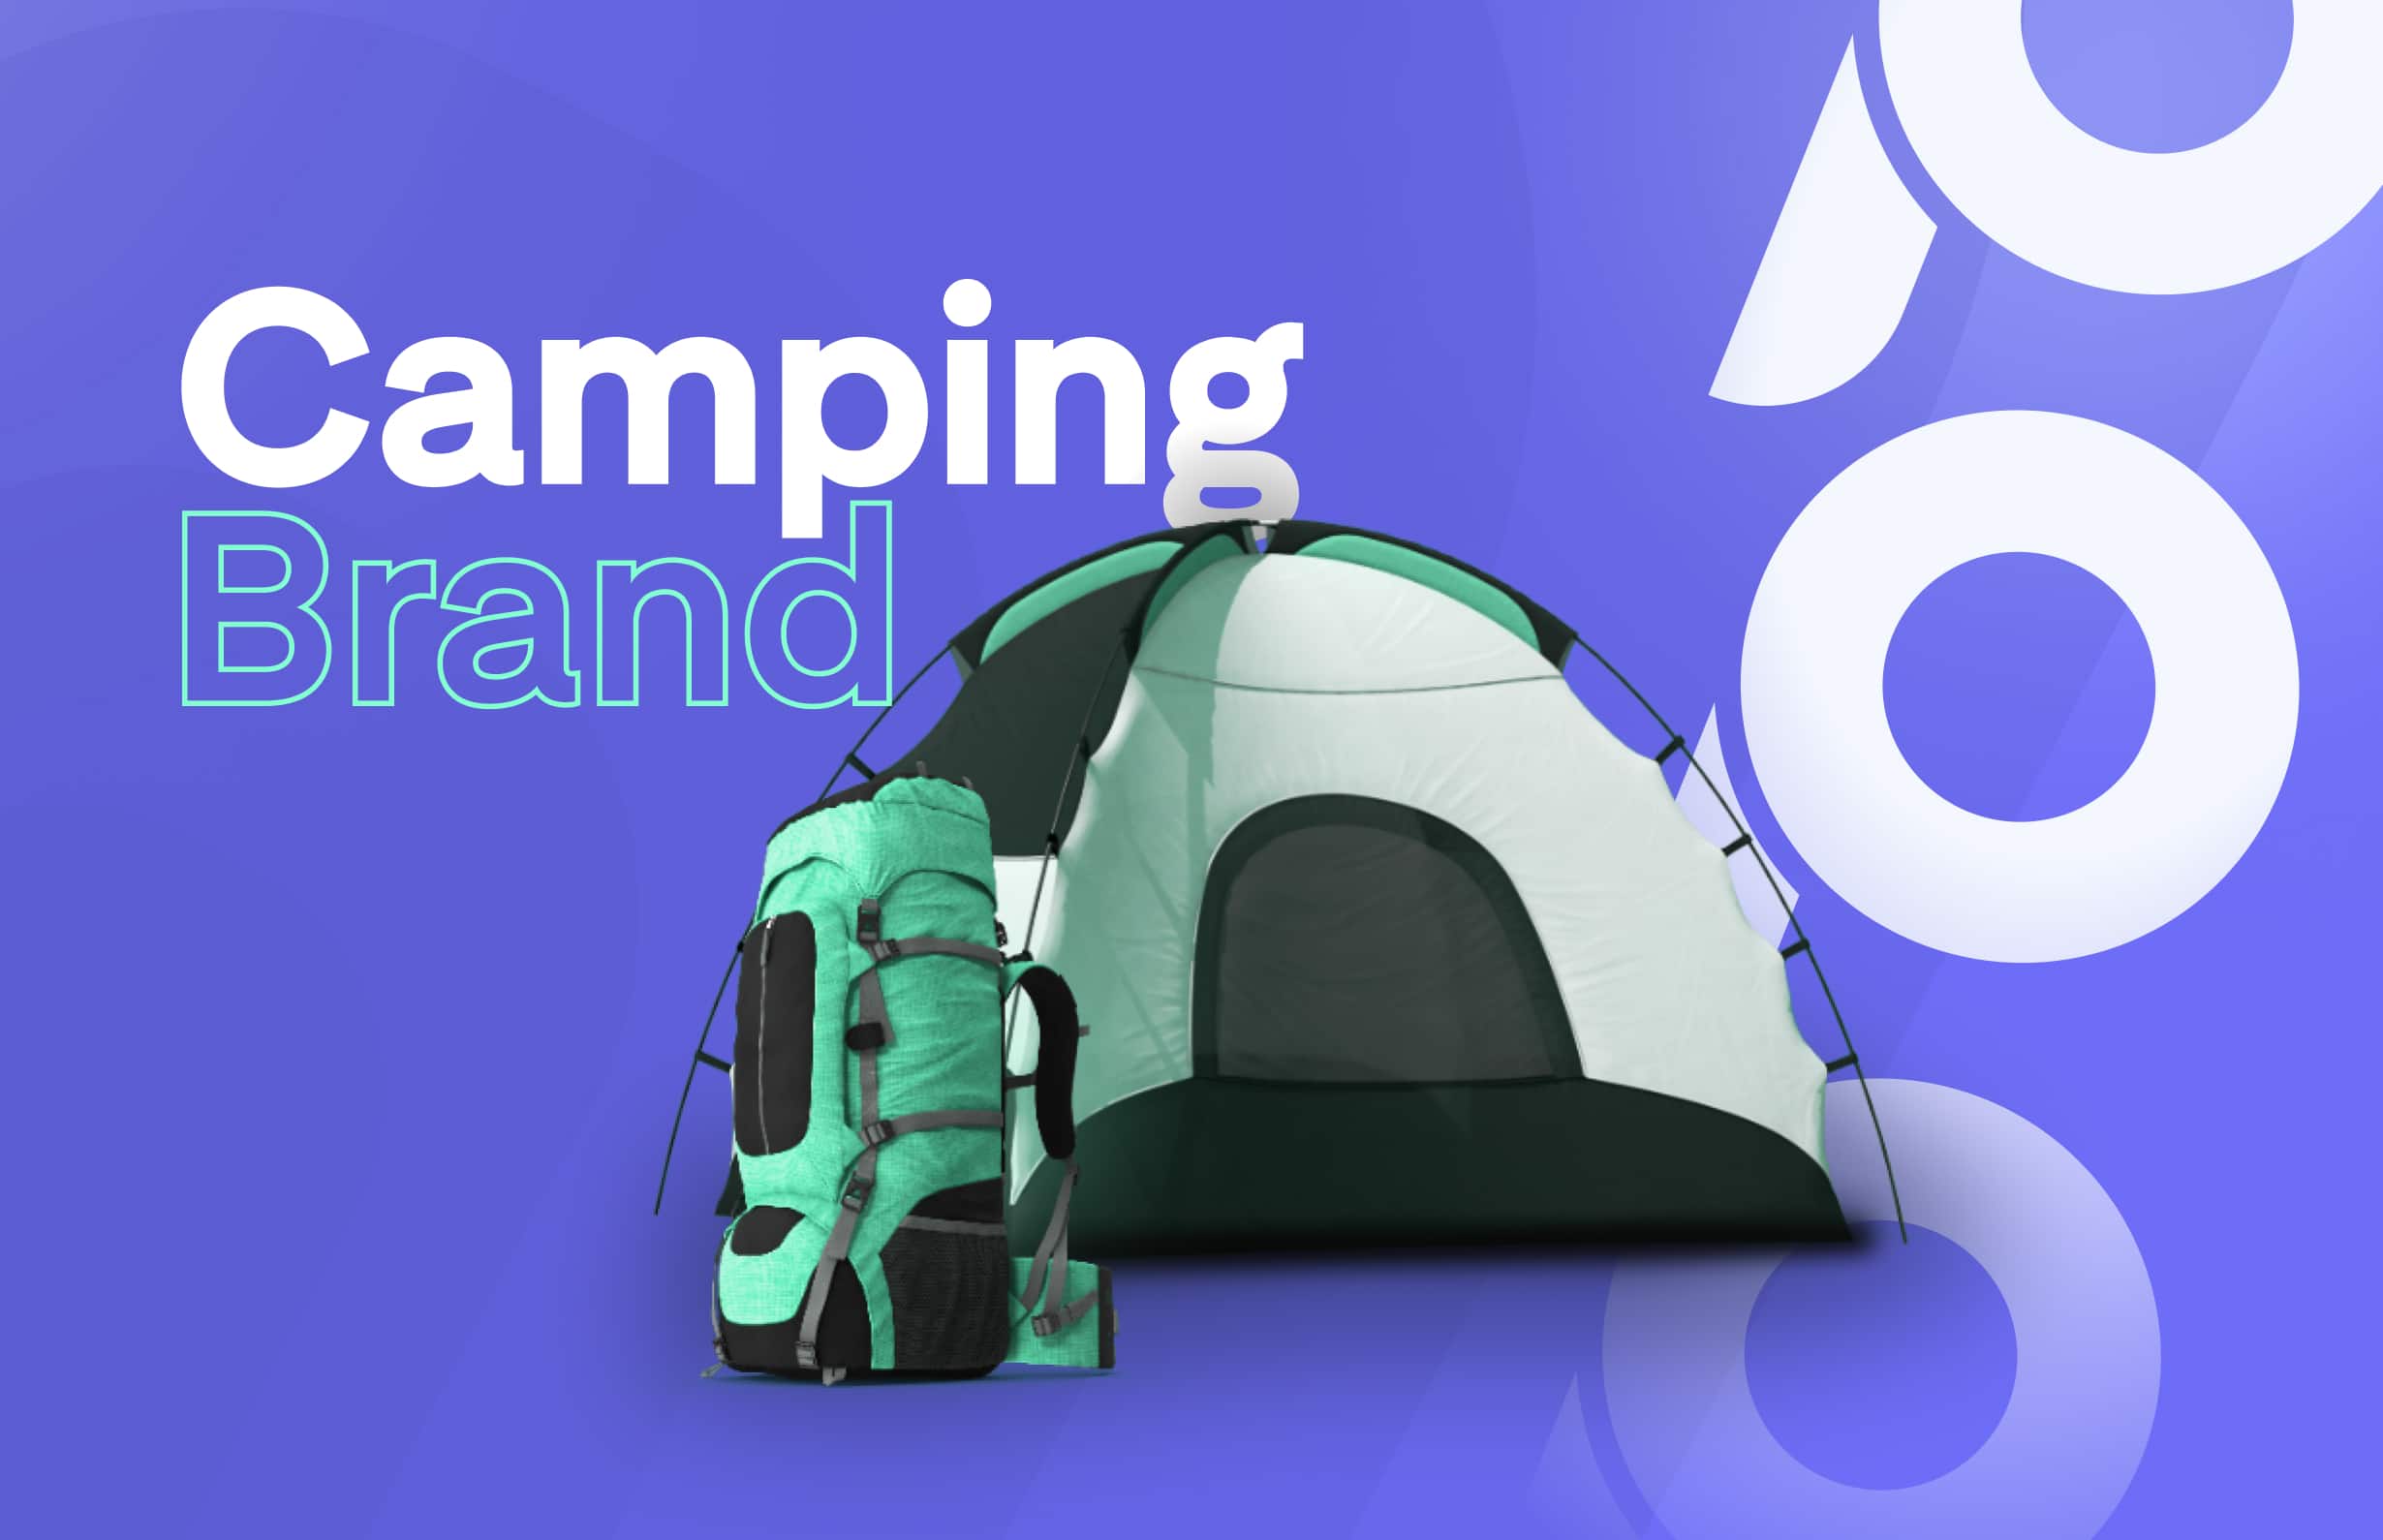 Camping Brand case study